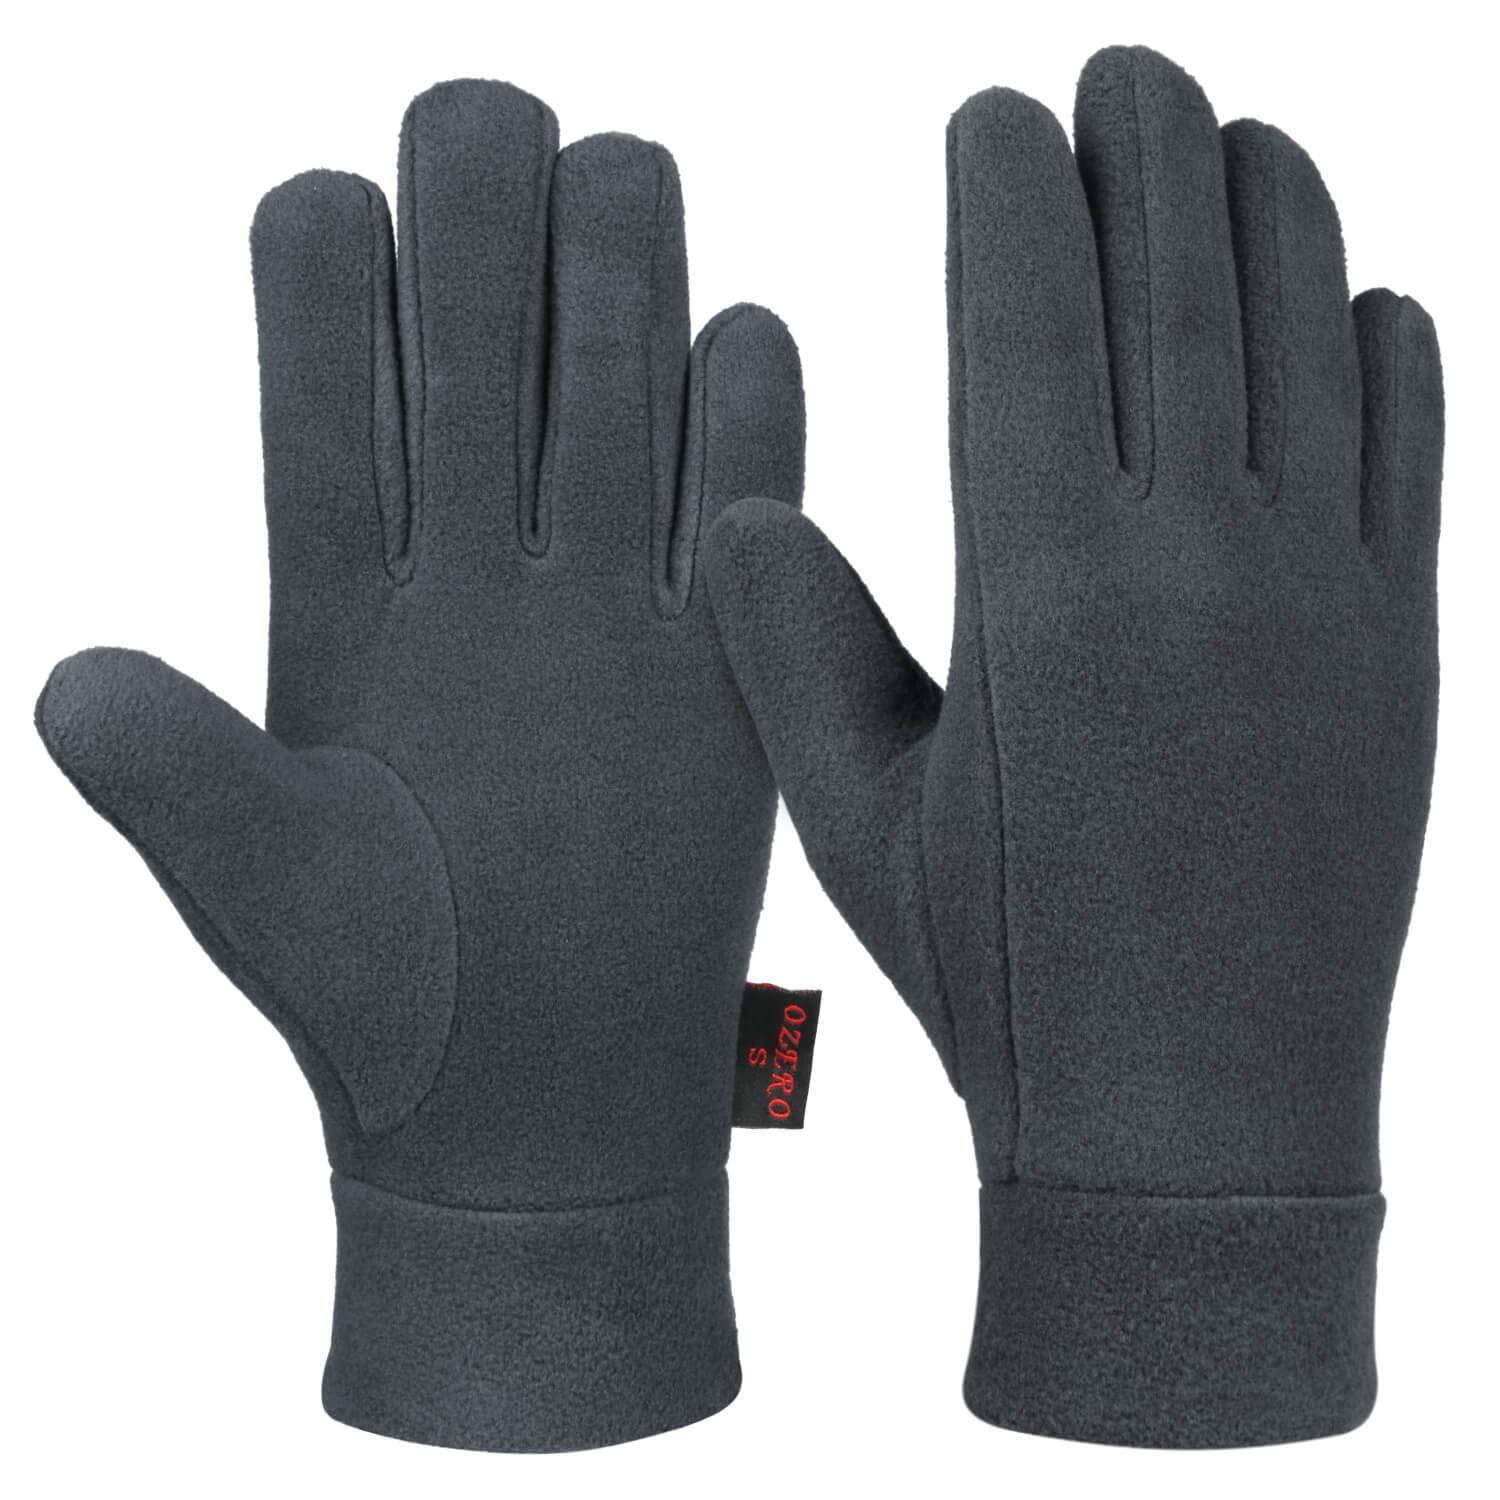 women's glove liners for cold weather